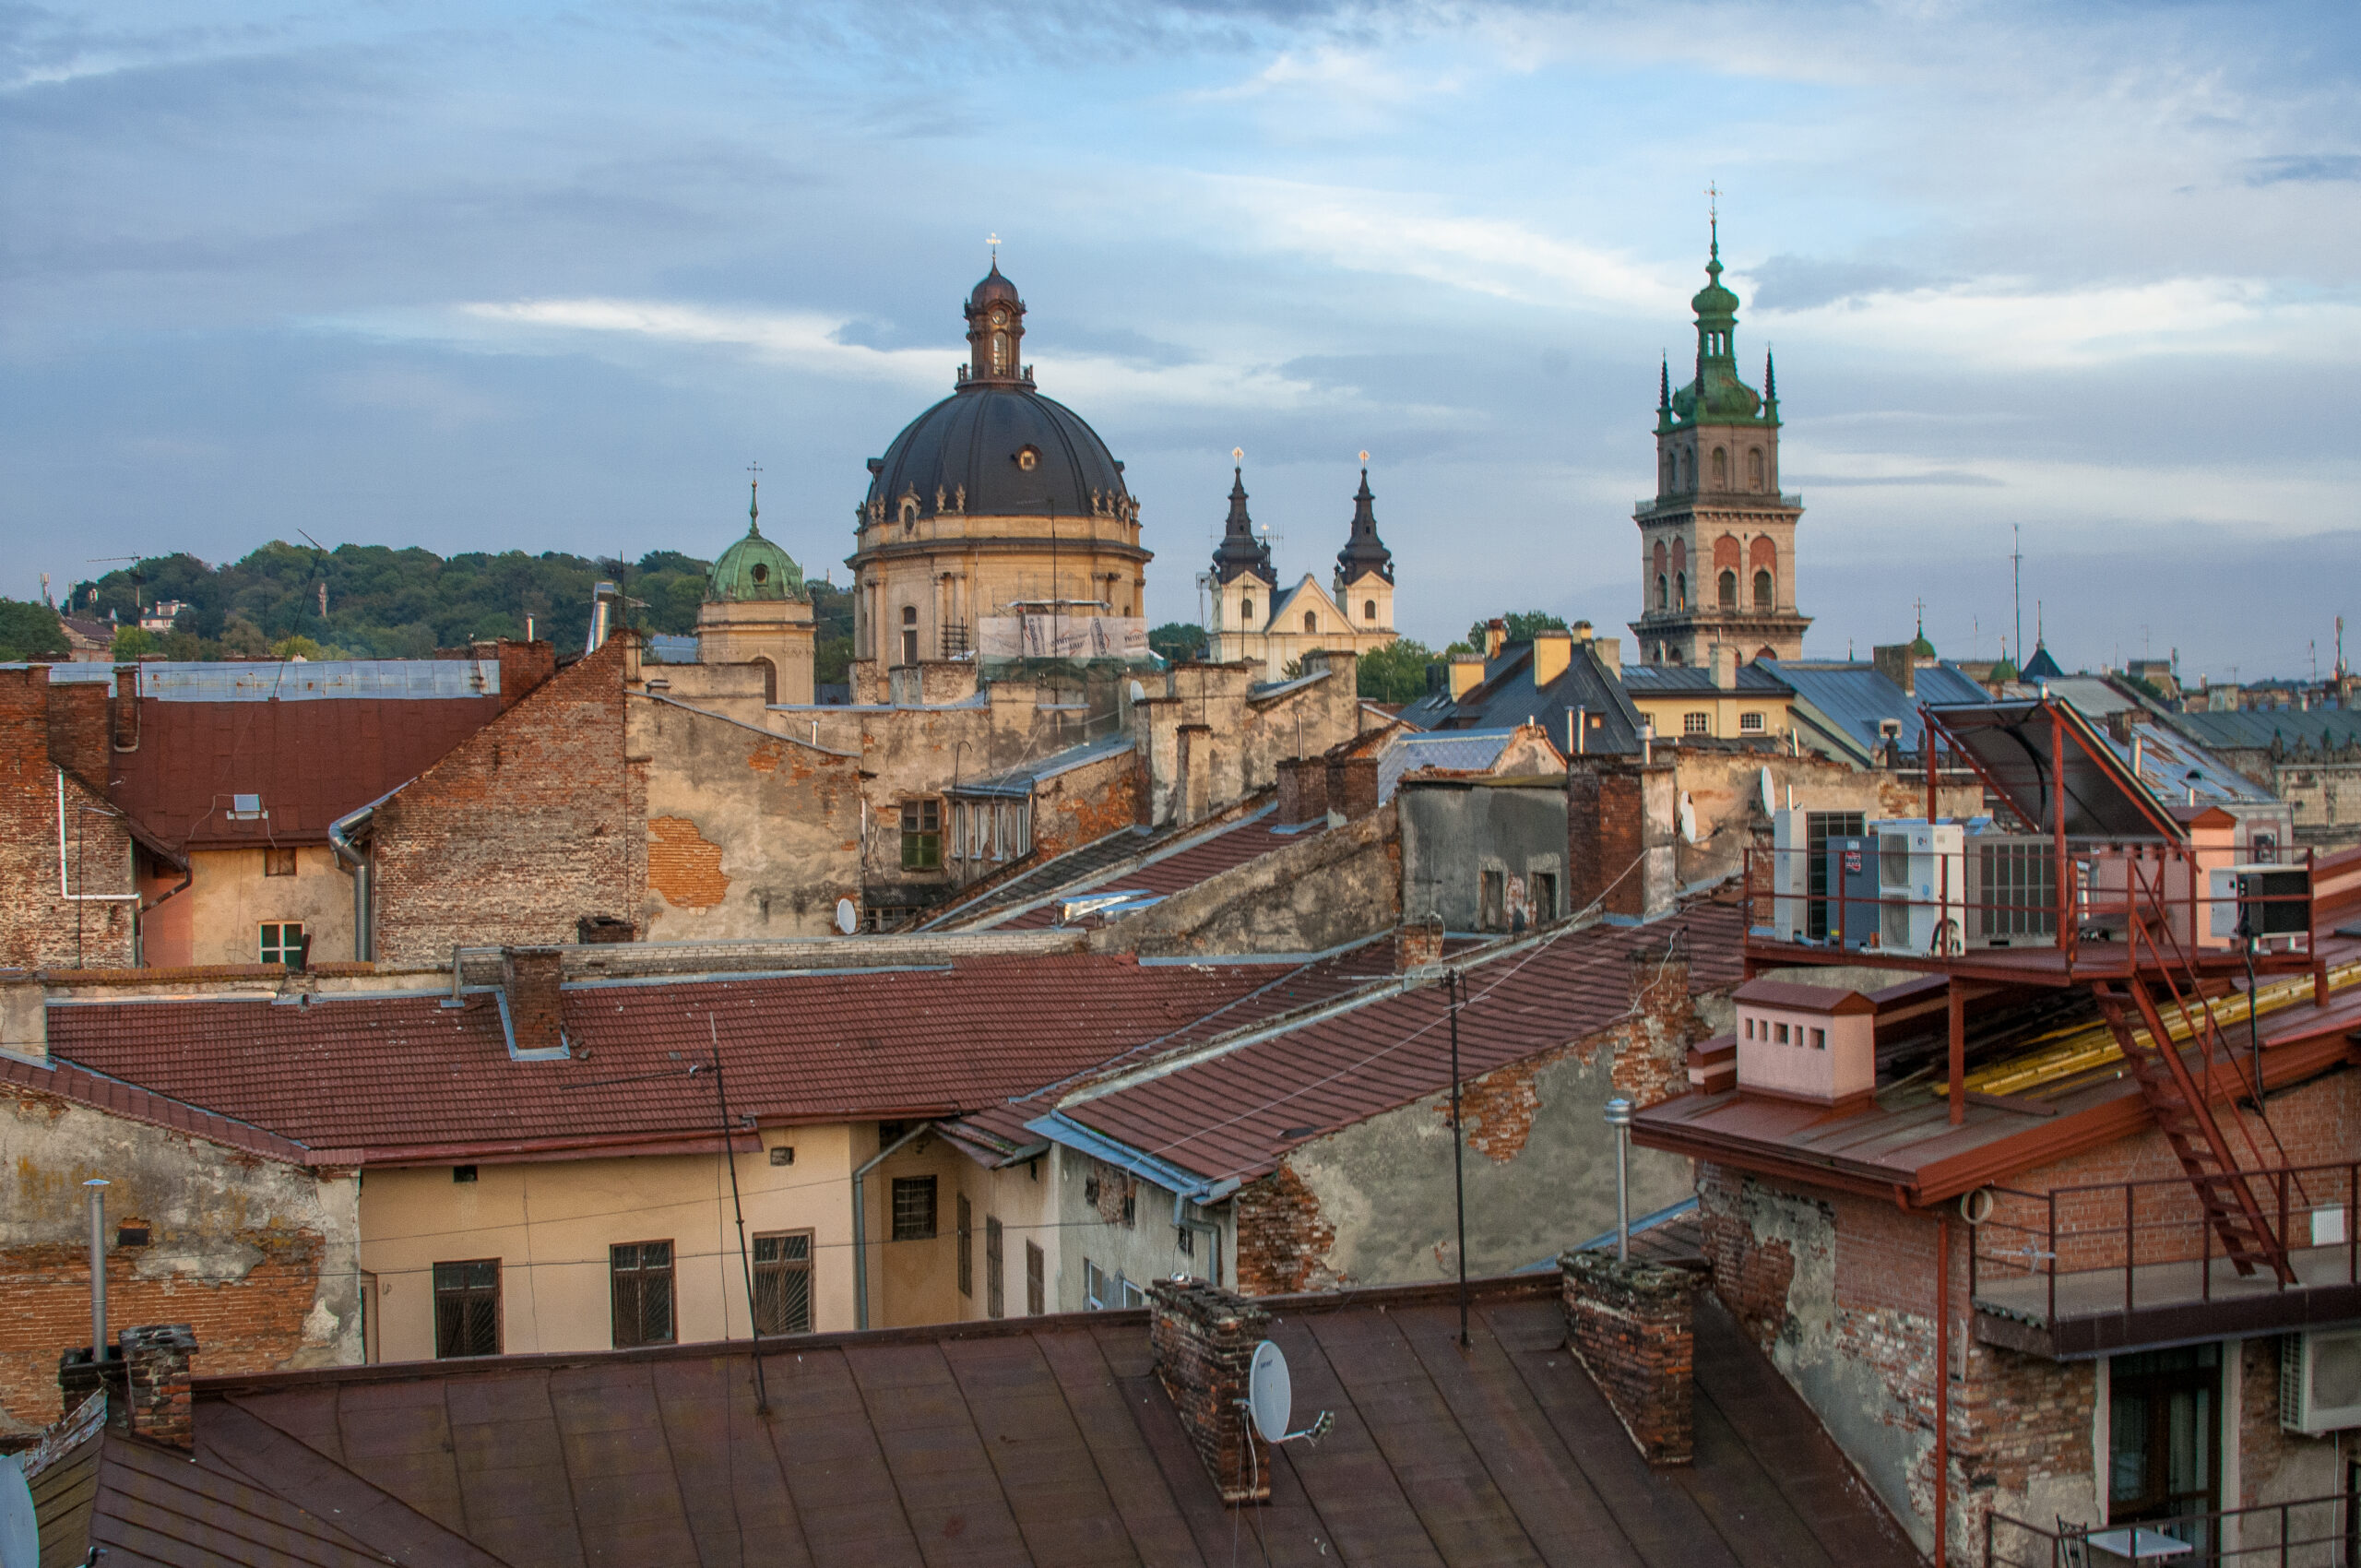 Lviv - Best view point in the city